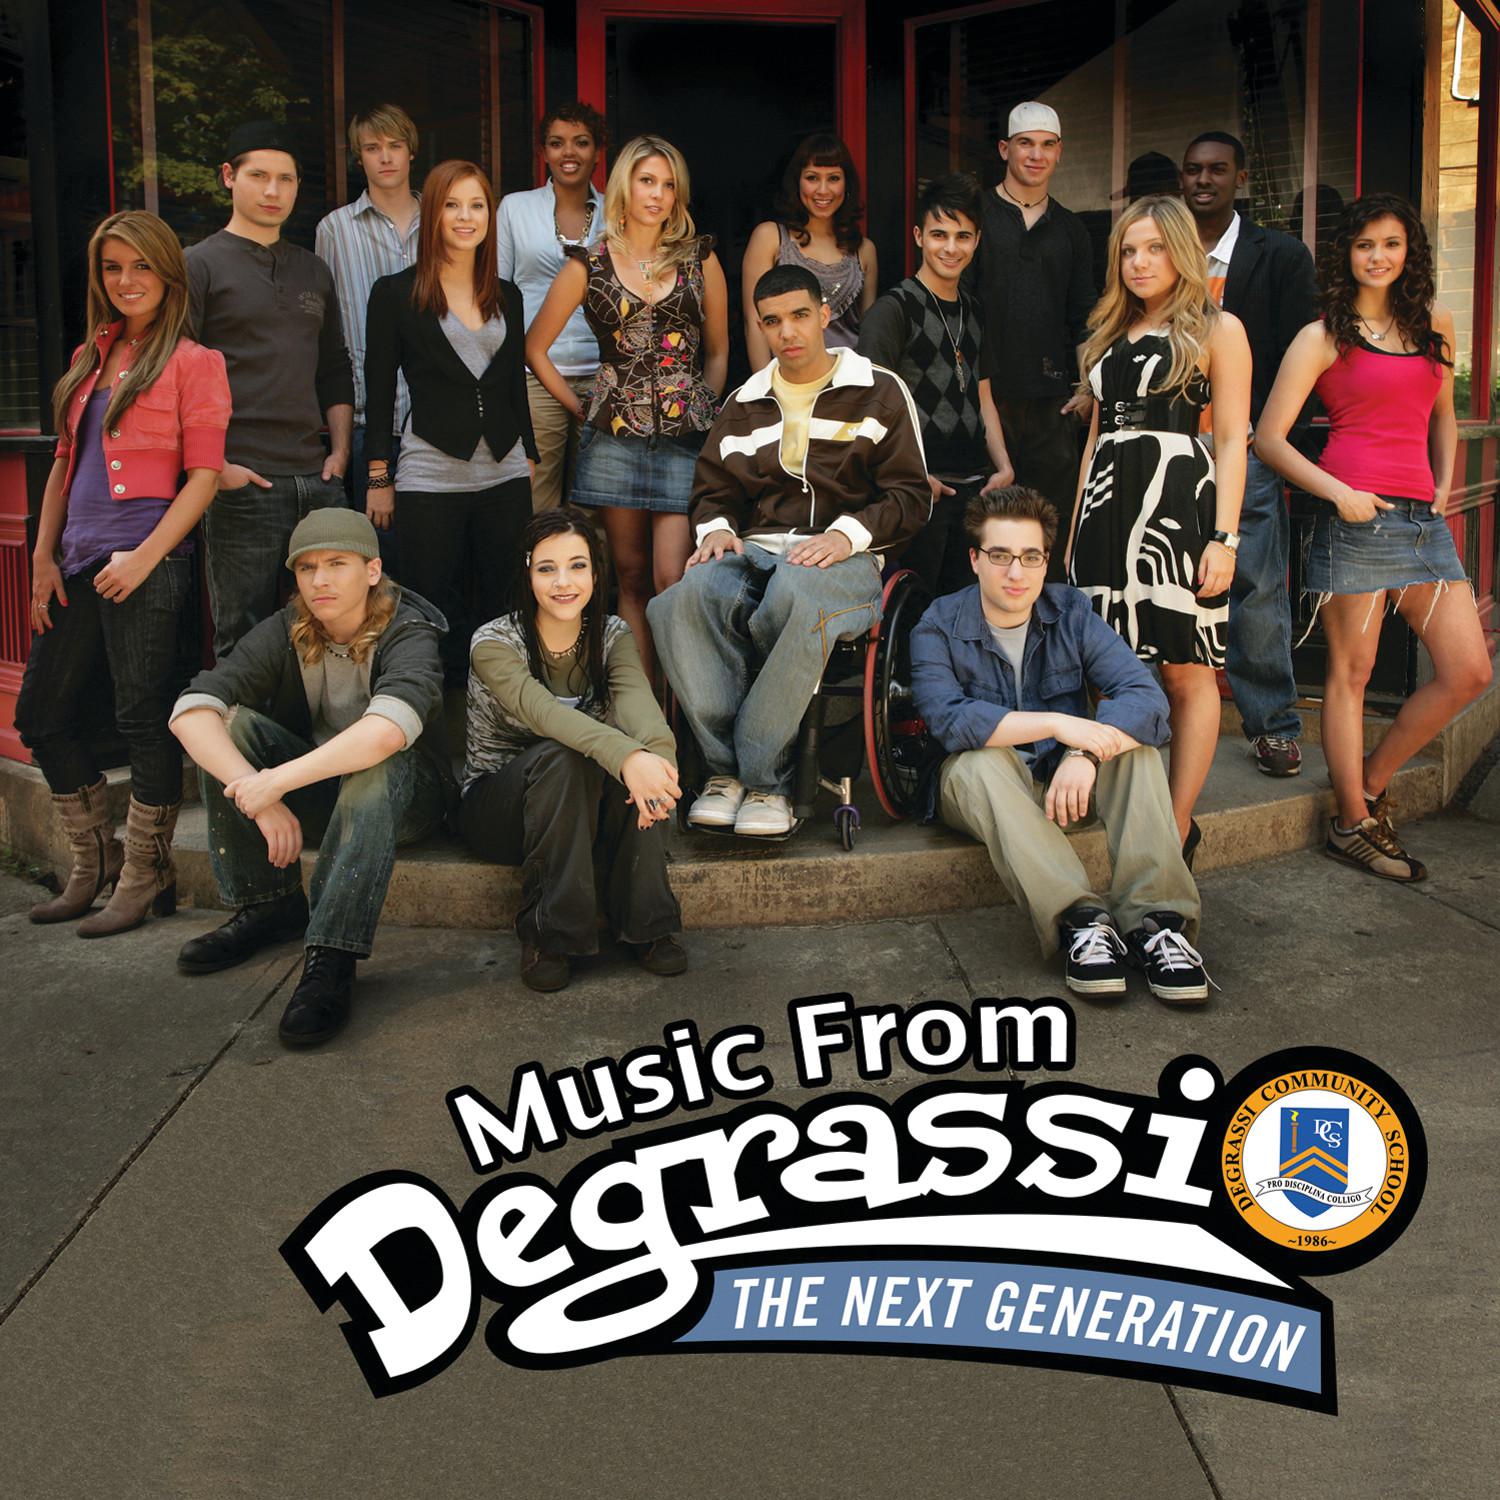 Music From Degrassi: The Next Generation